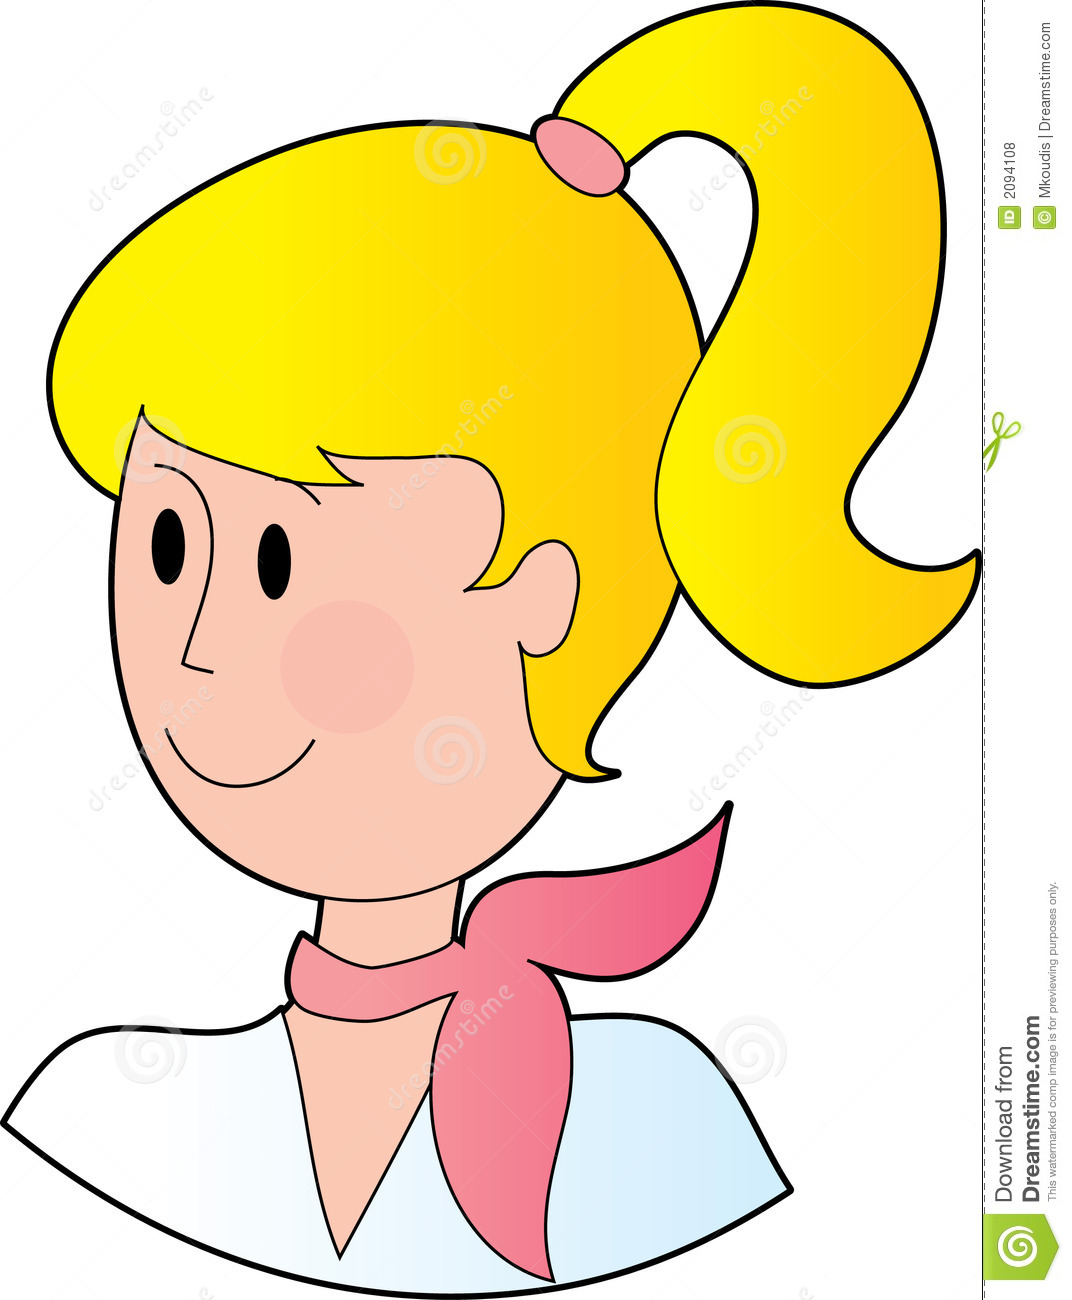 Ponytail clipart #16, Download drawings